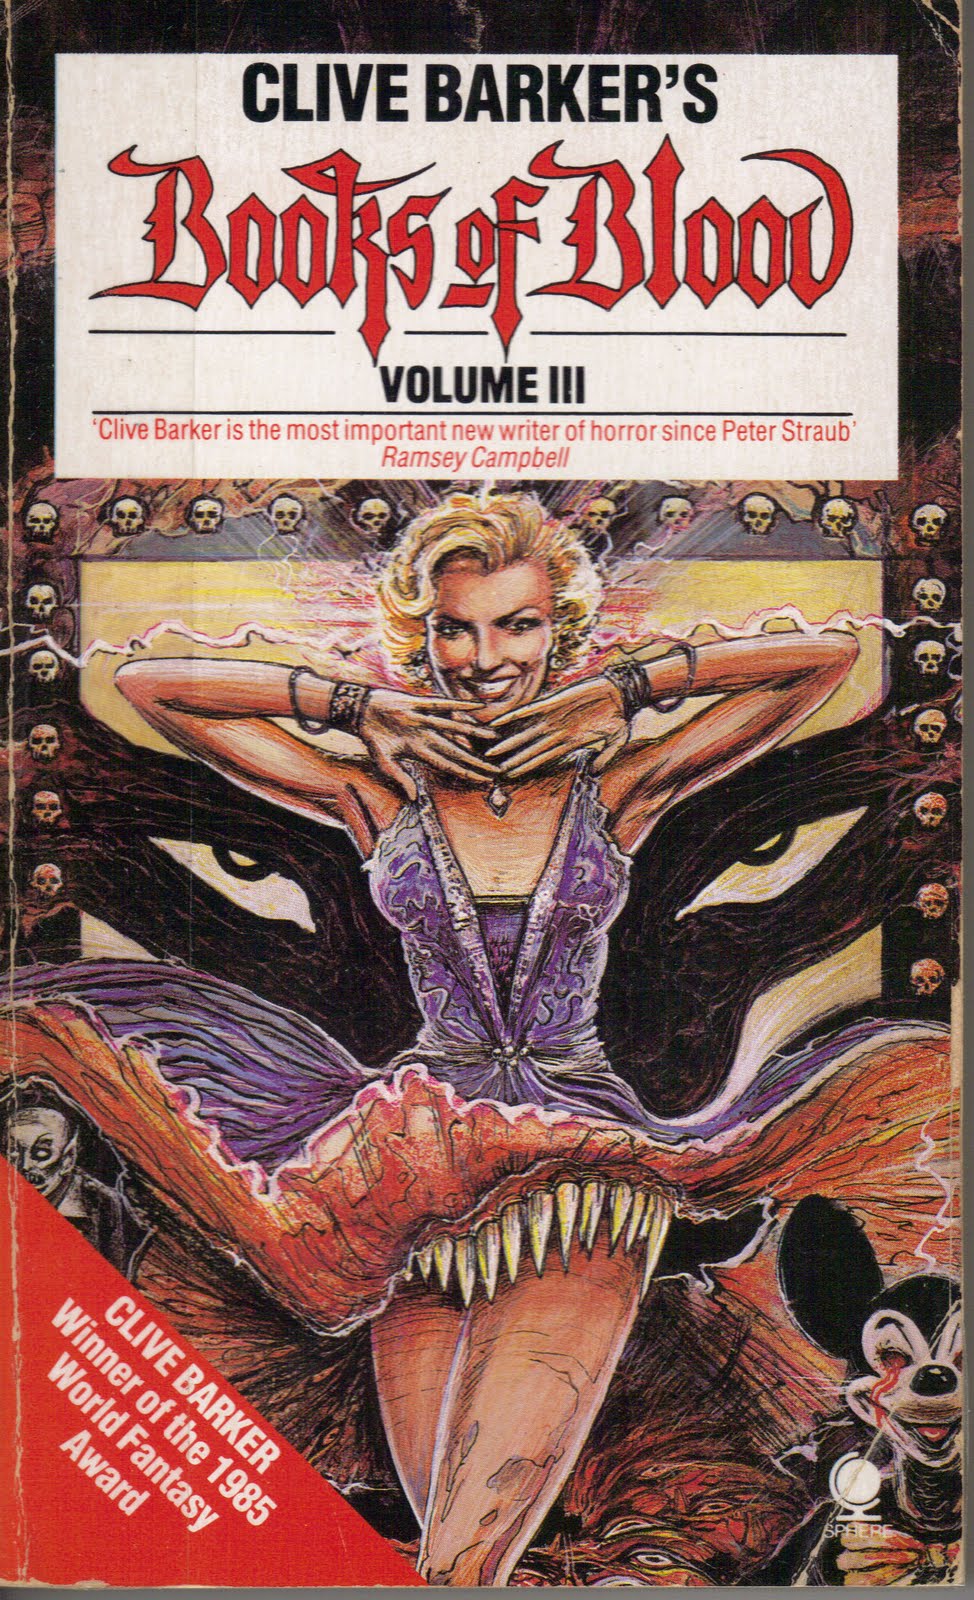 Clive Barker Books of Blood III